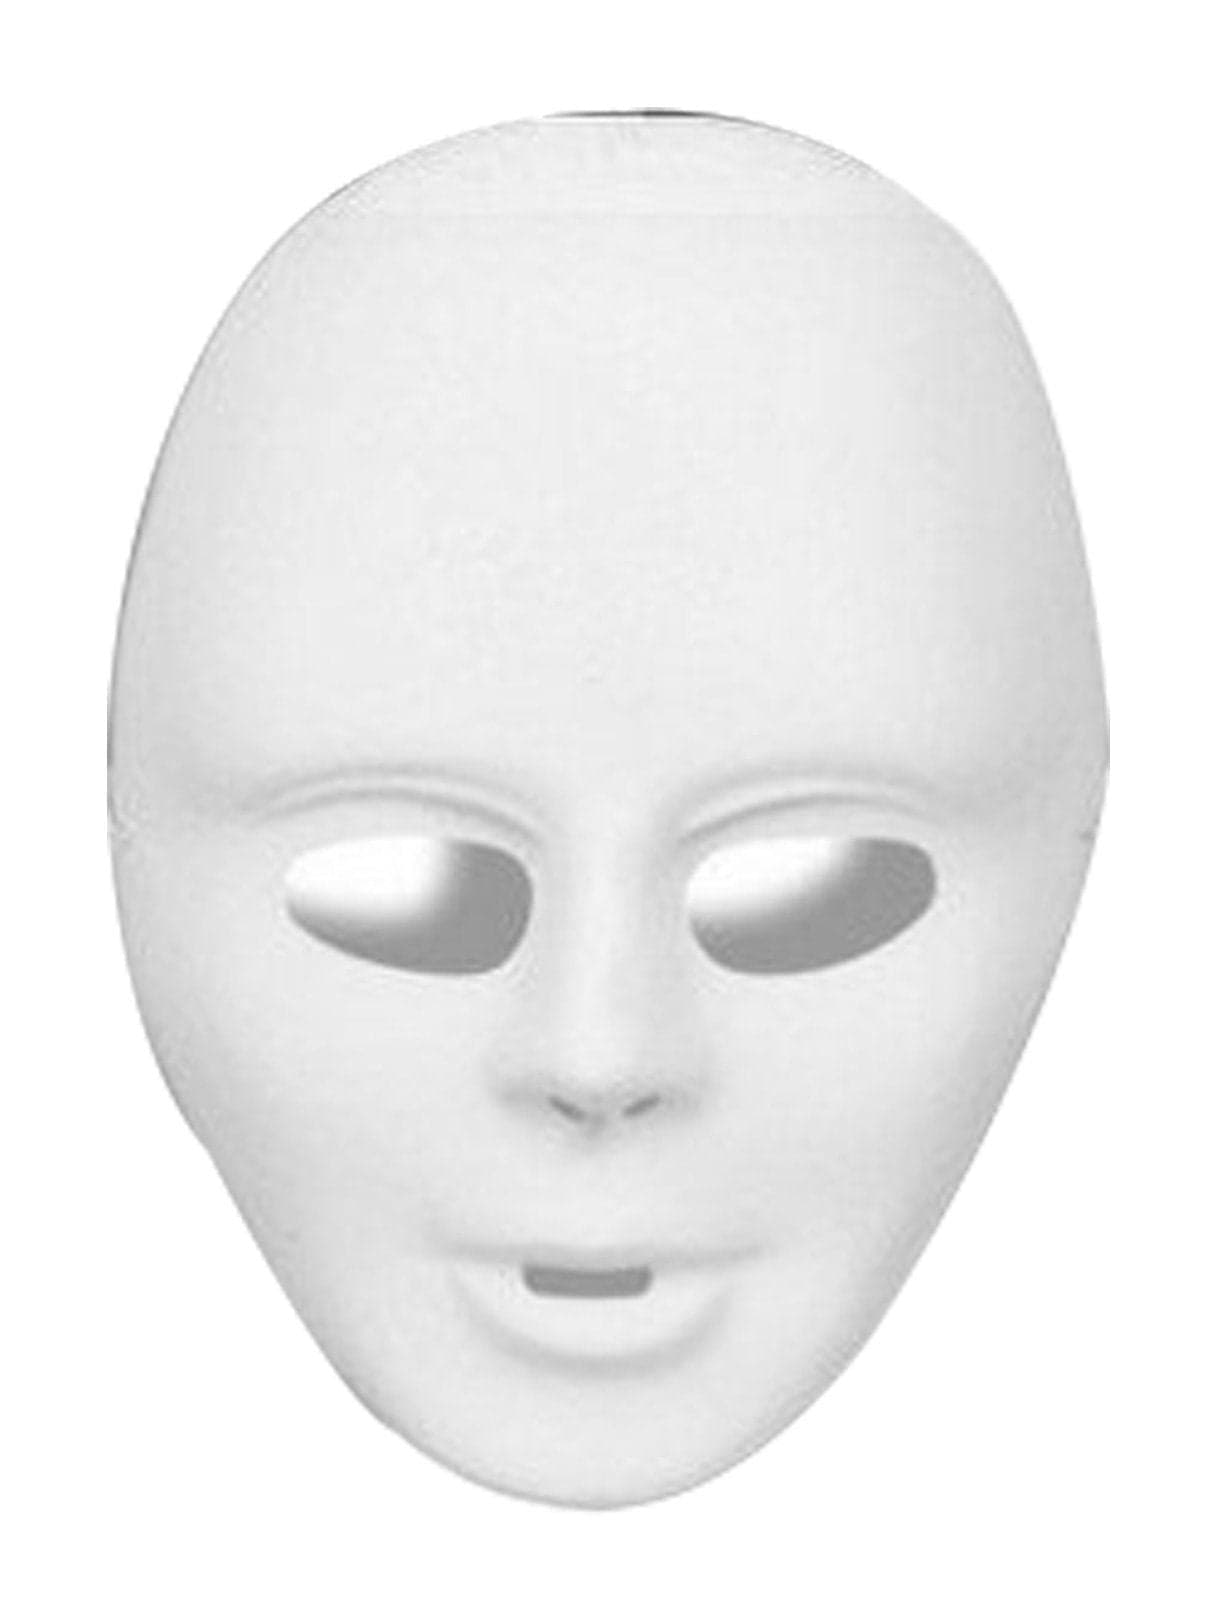 Face Mask - White - costumes.com